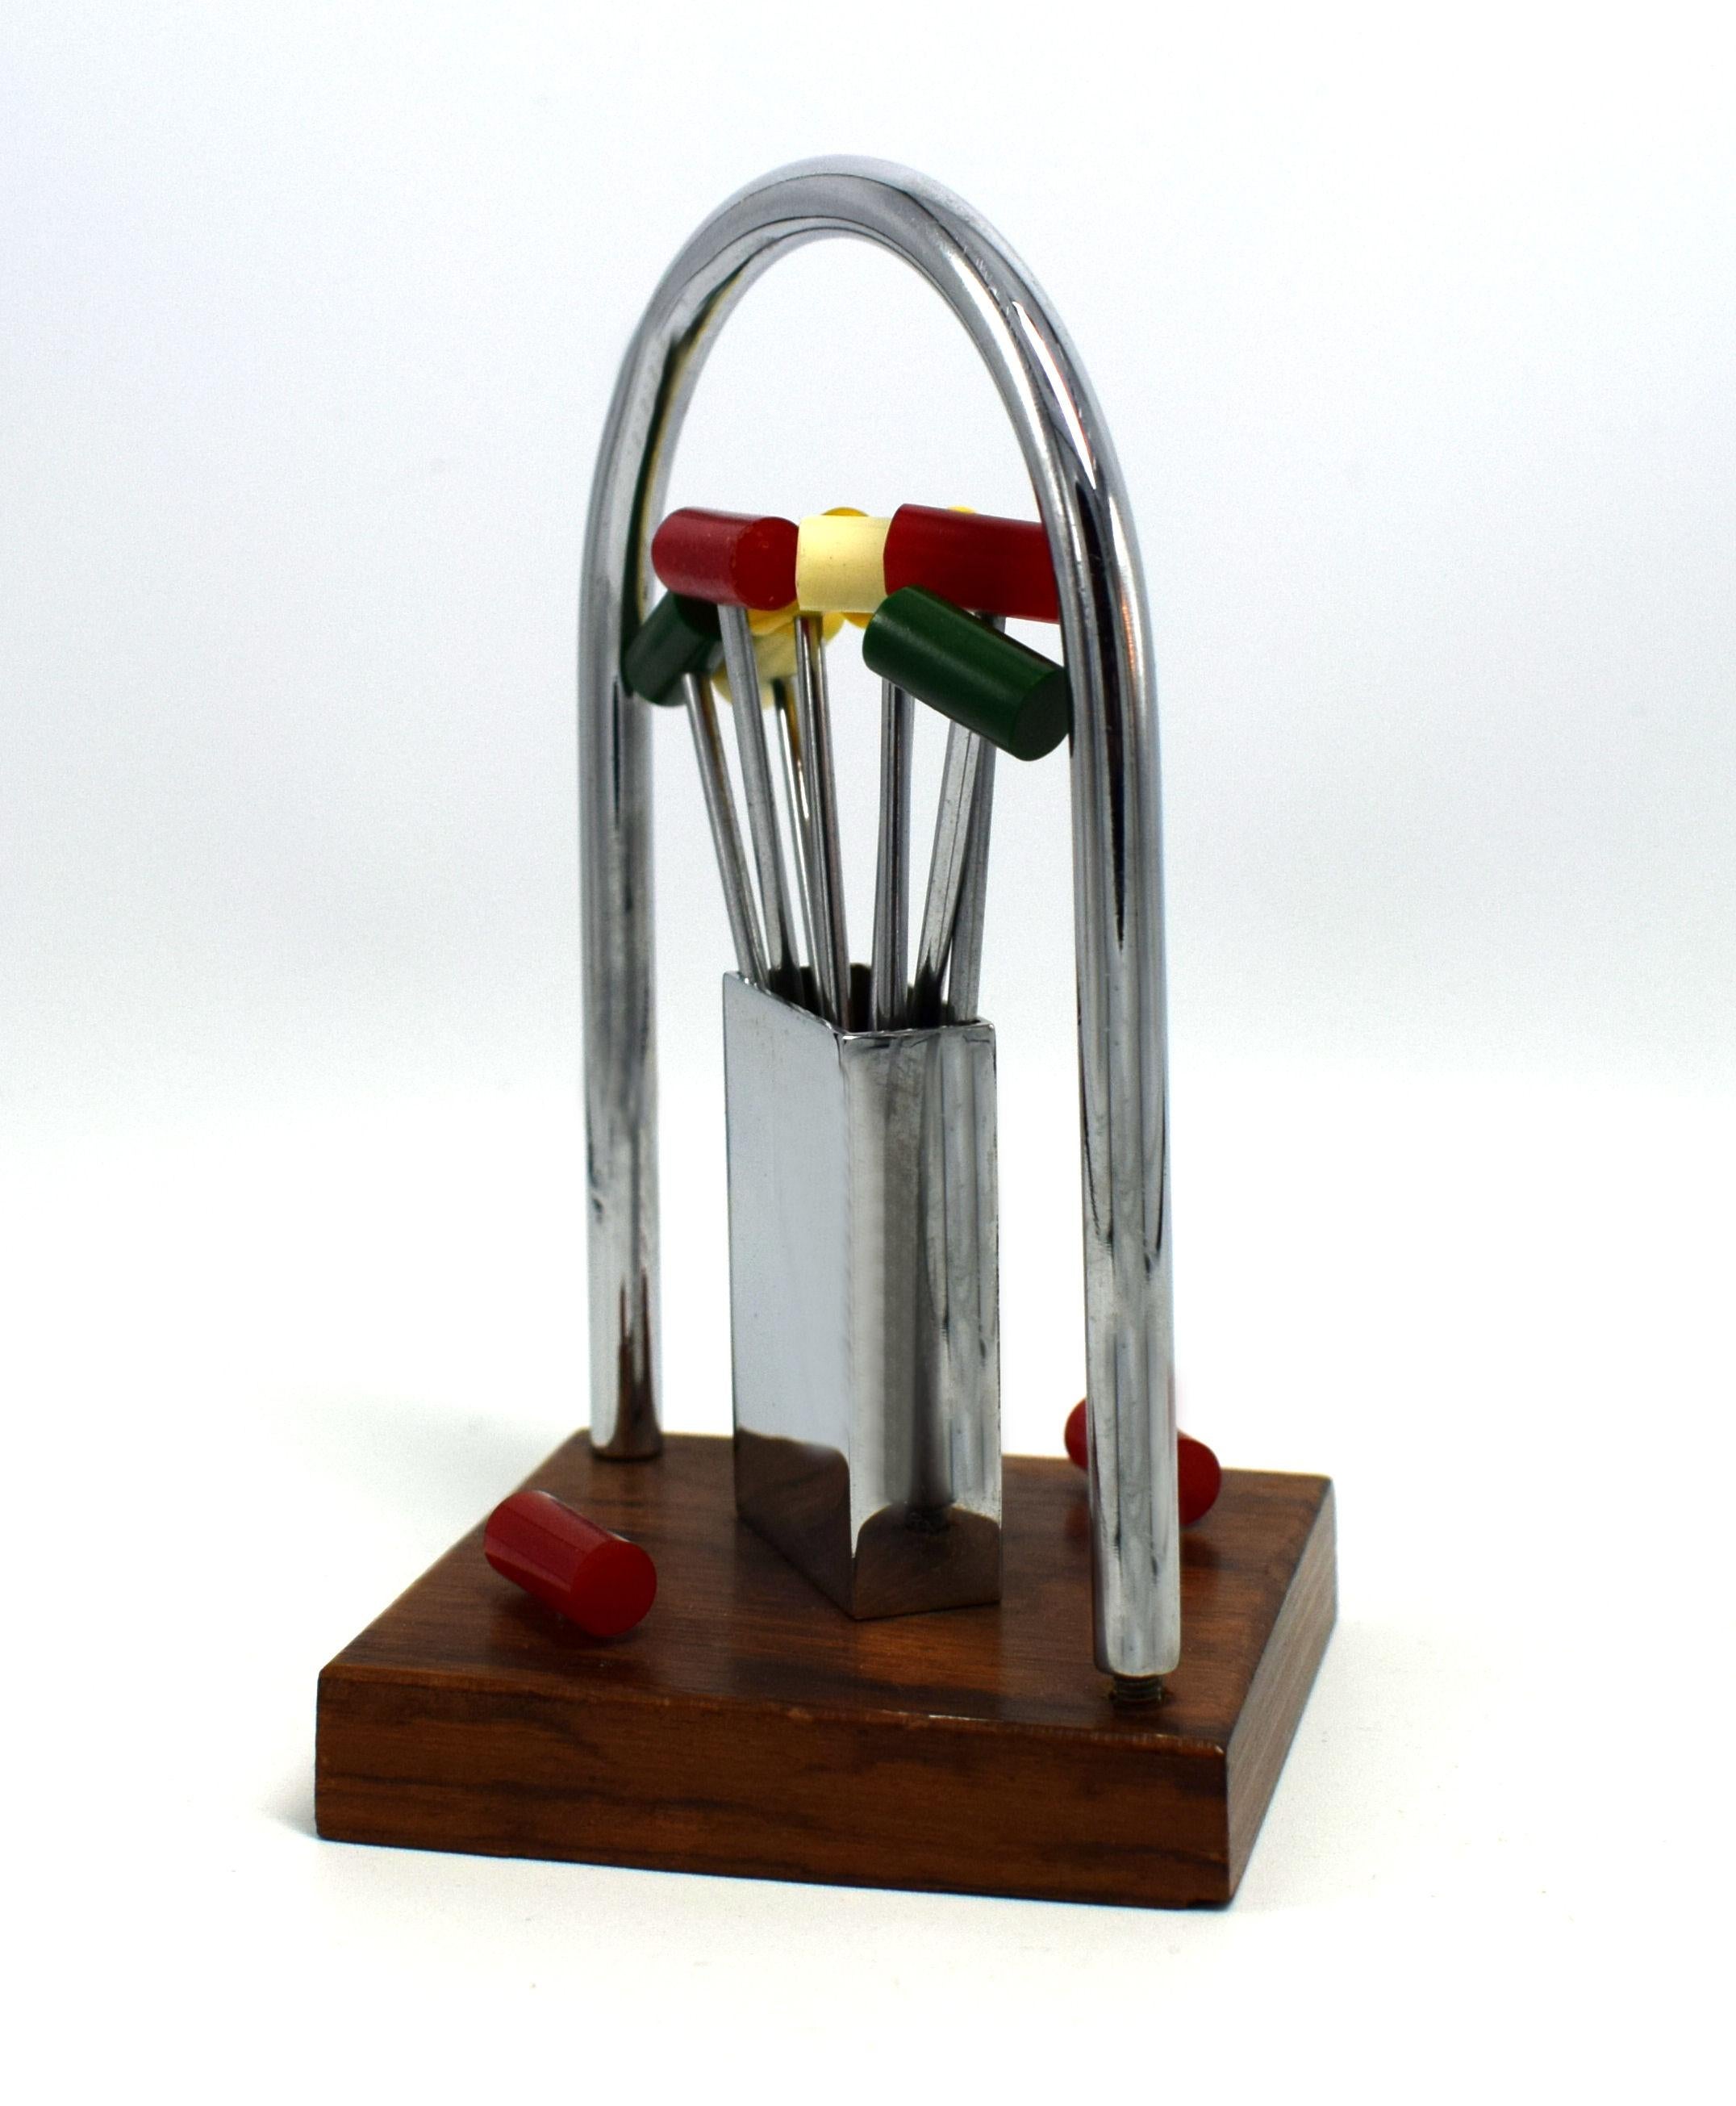 A novelty 1930s cocktail stick set in the manner of a croquet set made in France. Features different coloured Bakelite cocktail sticks with chromed metal prongs, all contained within a chrome box hold on a walnut base. Great set in very good